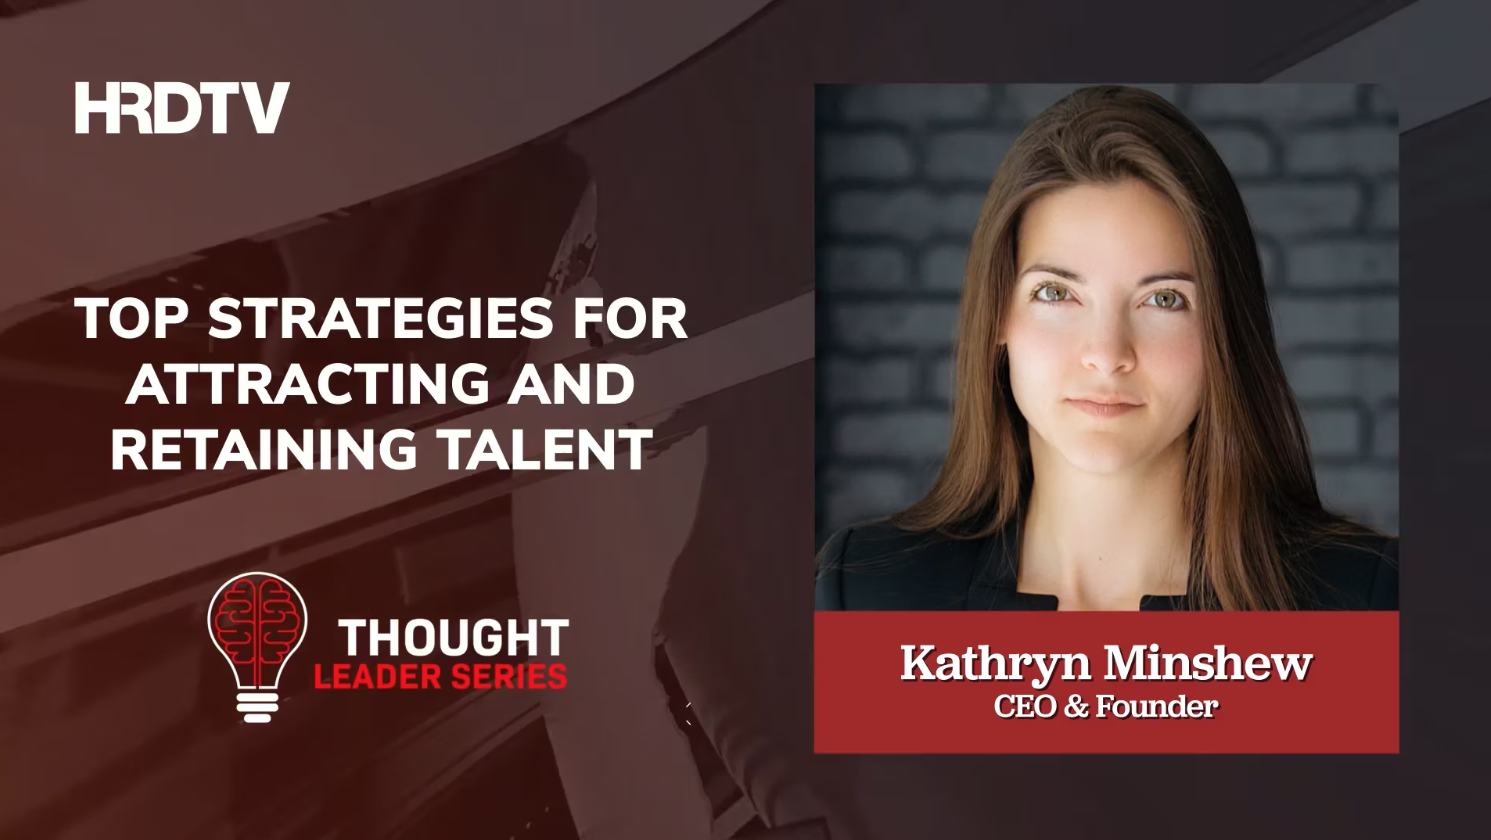 Top strategies for attracting and retaining talent